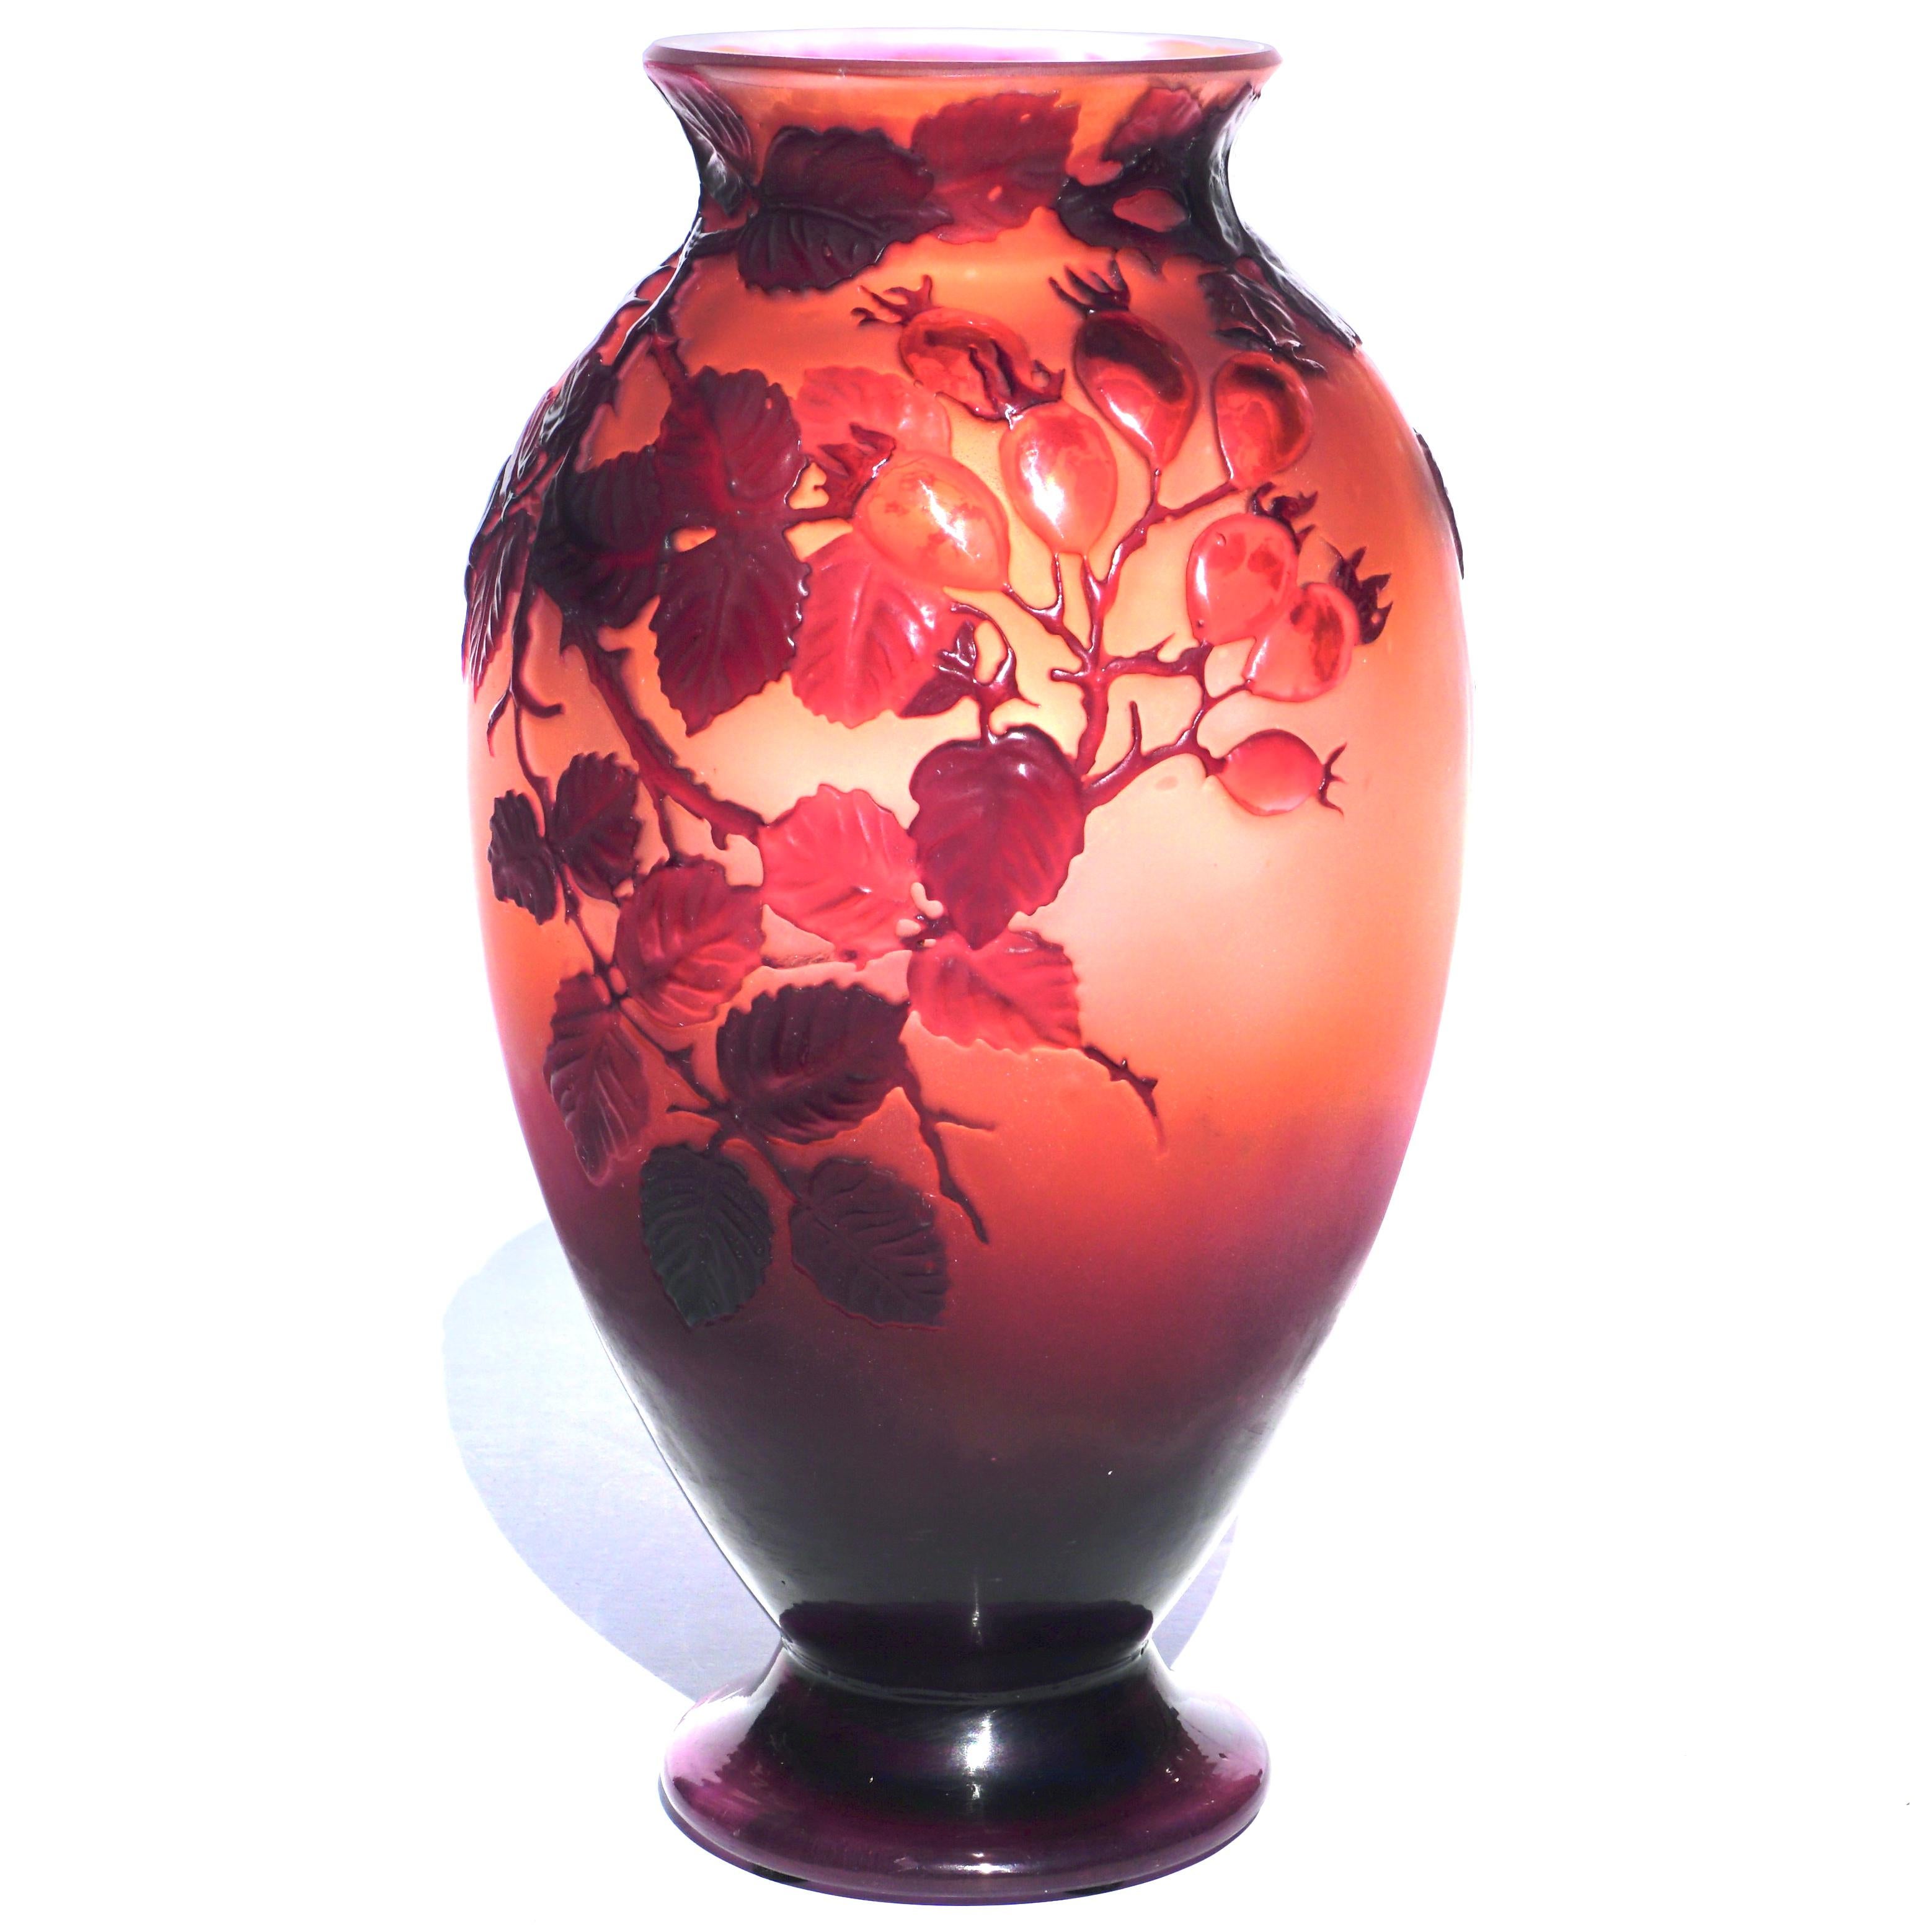 Émile Gallé (Fr. 1846 - 1904) Red Blown Out Wild Rose Cameo Art Nouveau Vase.
Wild Rose vase circa 1900-1910
Mould-blown out cameo glass. 
Height: 9.35 inches (24 cm) diameter: 5.5 inches
Signed in cameo “Gallé”.
Condition: Very good with one